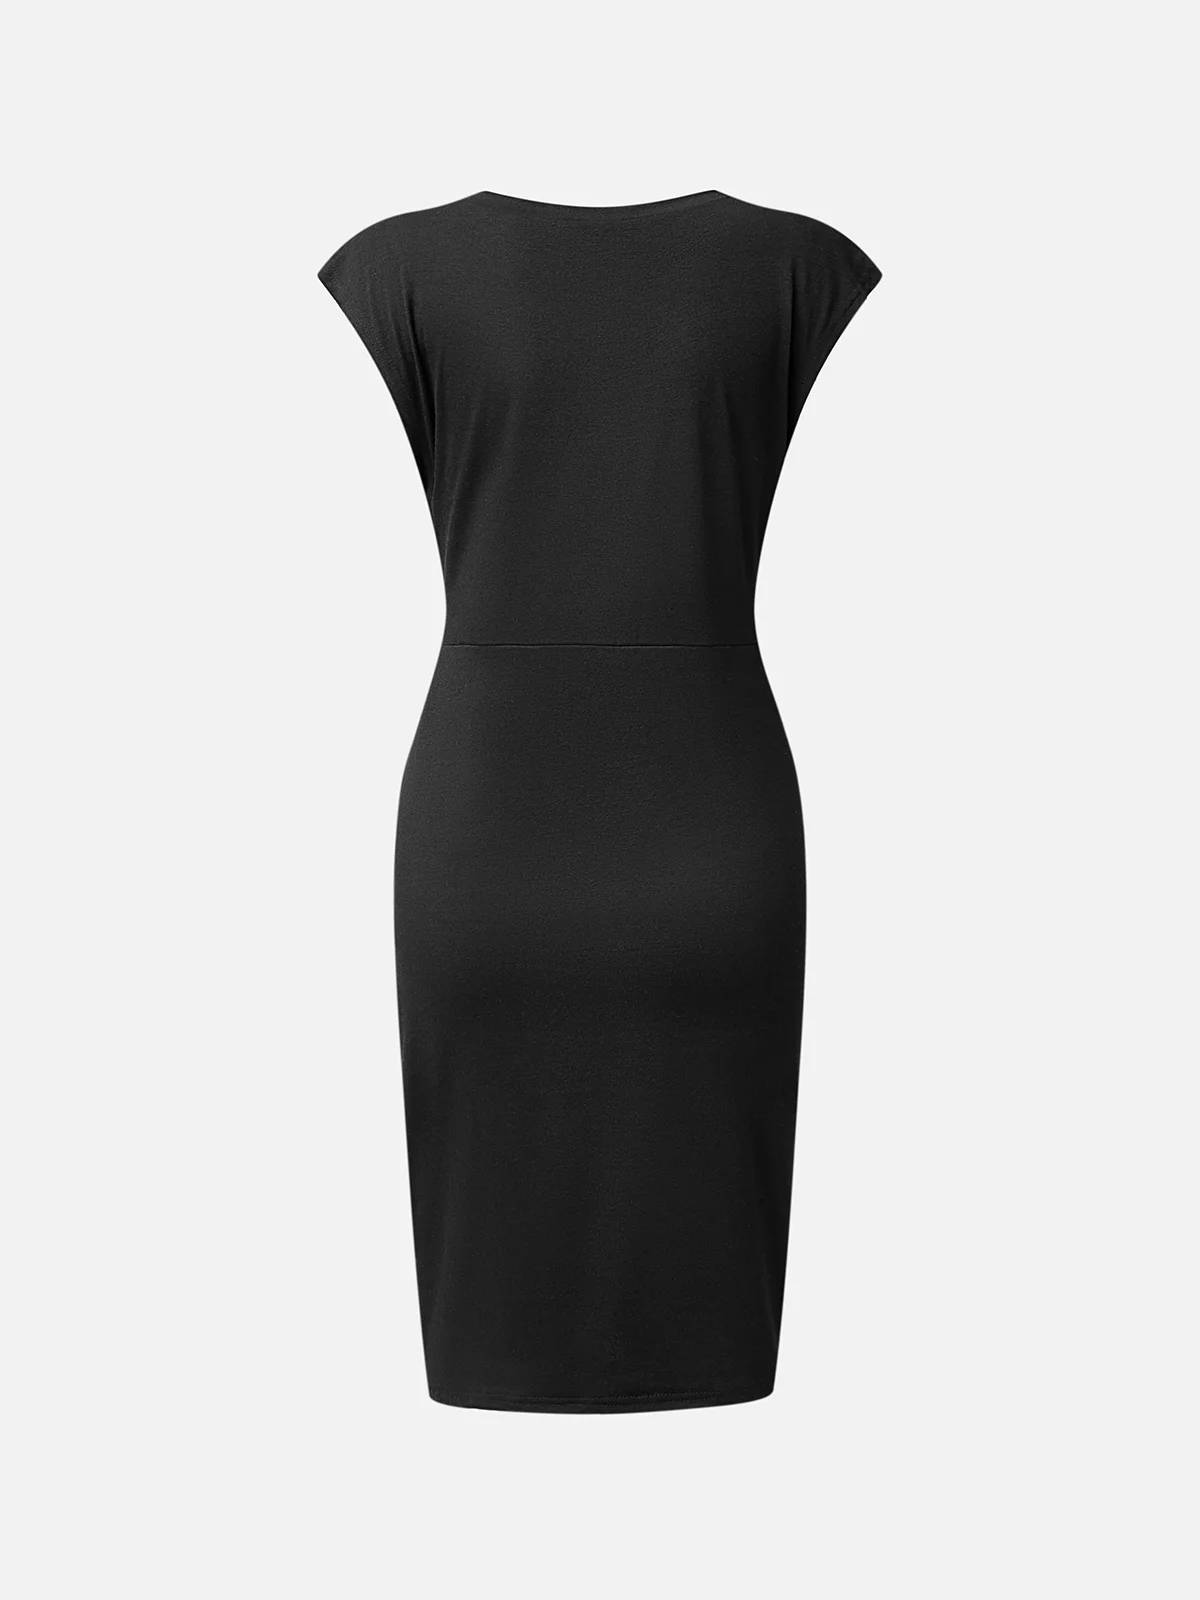 Crew Neck Twist Solid Fitted Dress